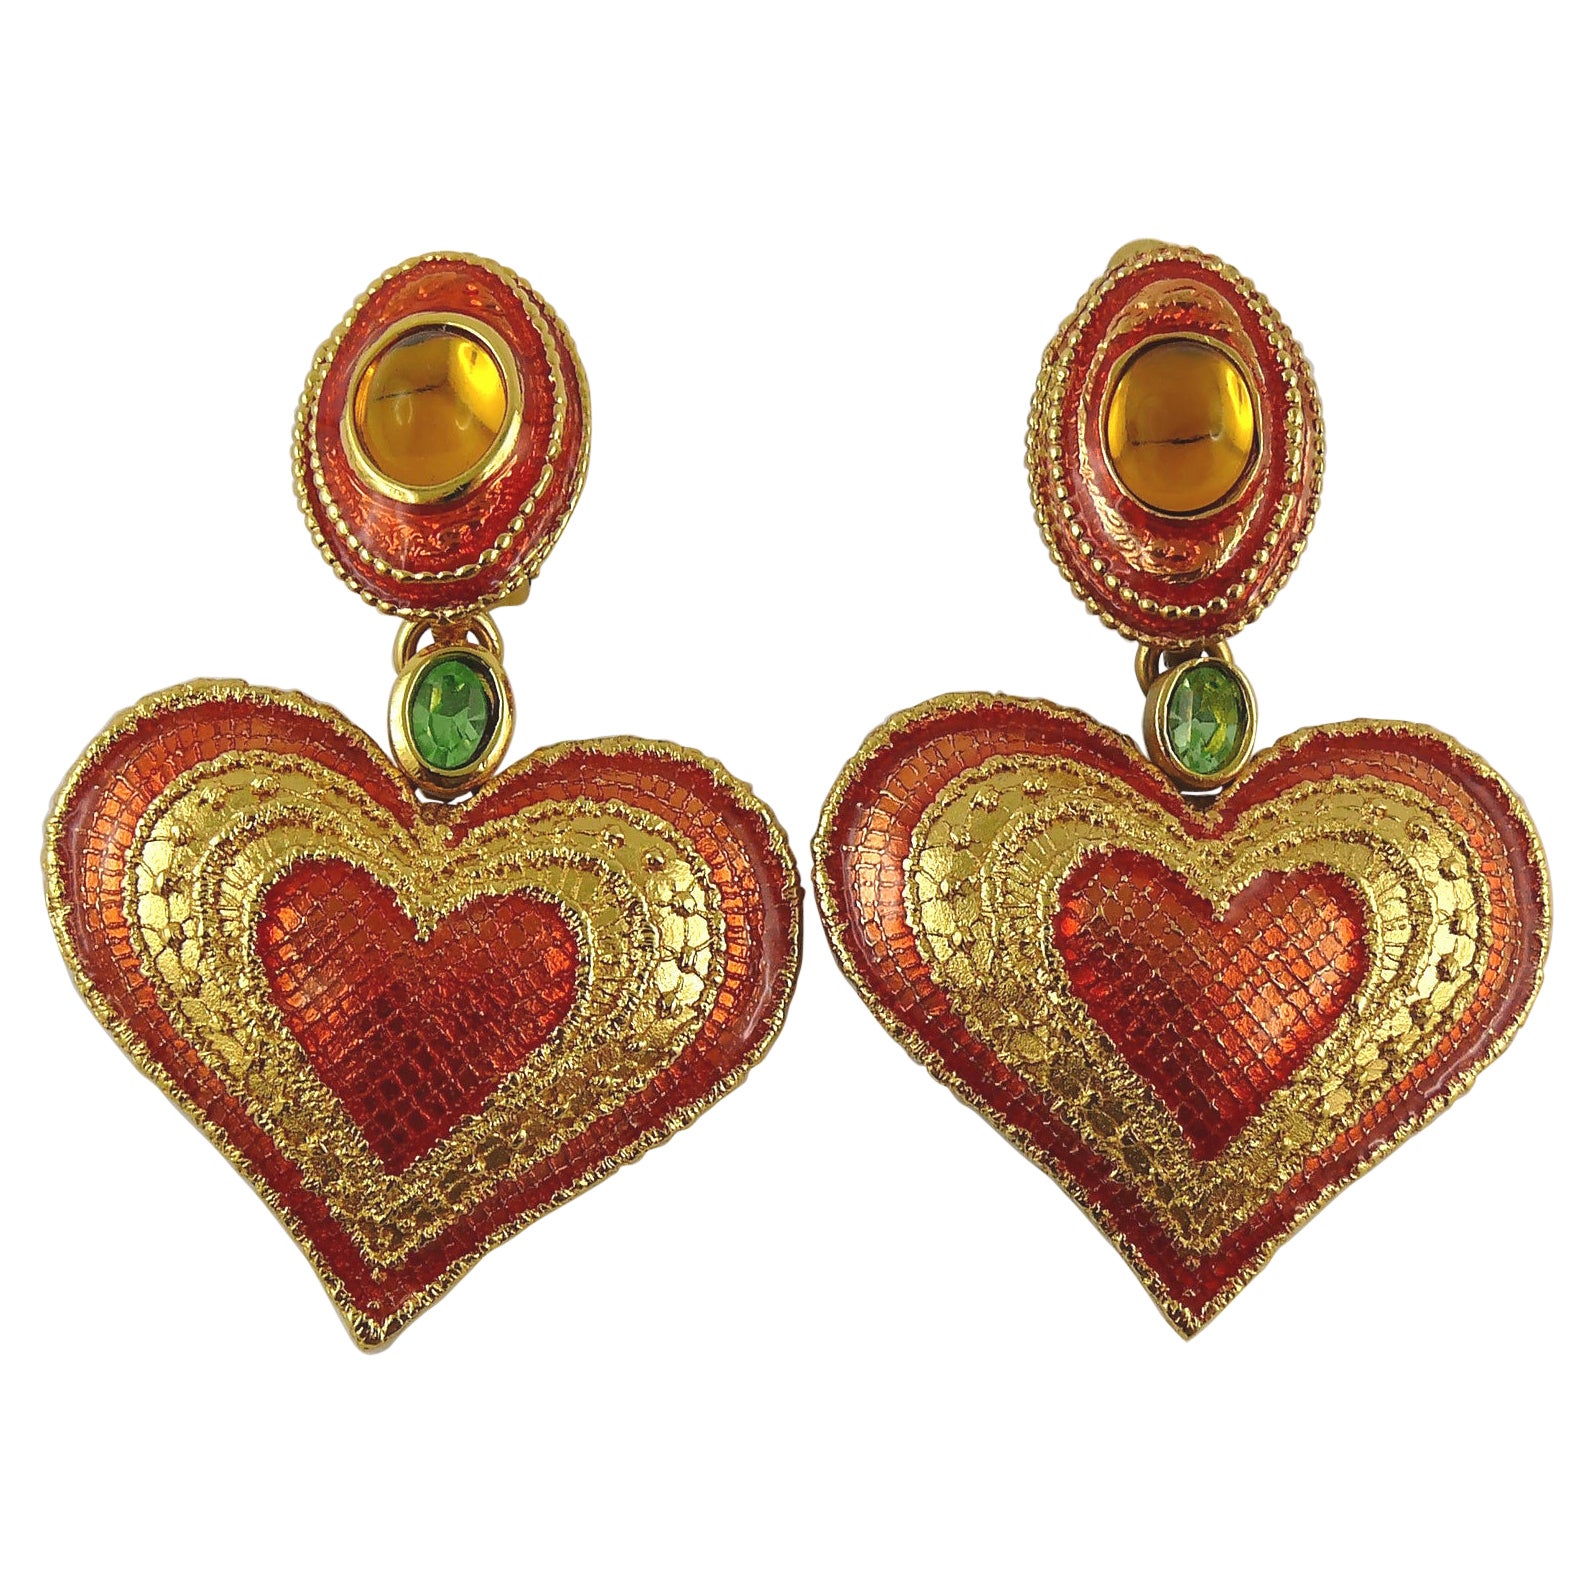 Vintage 1990s Multi Colored Enamel Earrings *Free Shipping in the US!